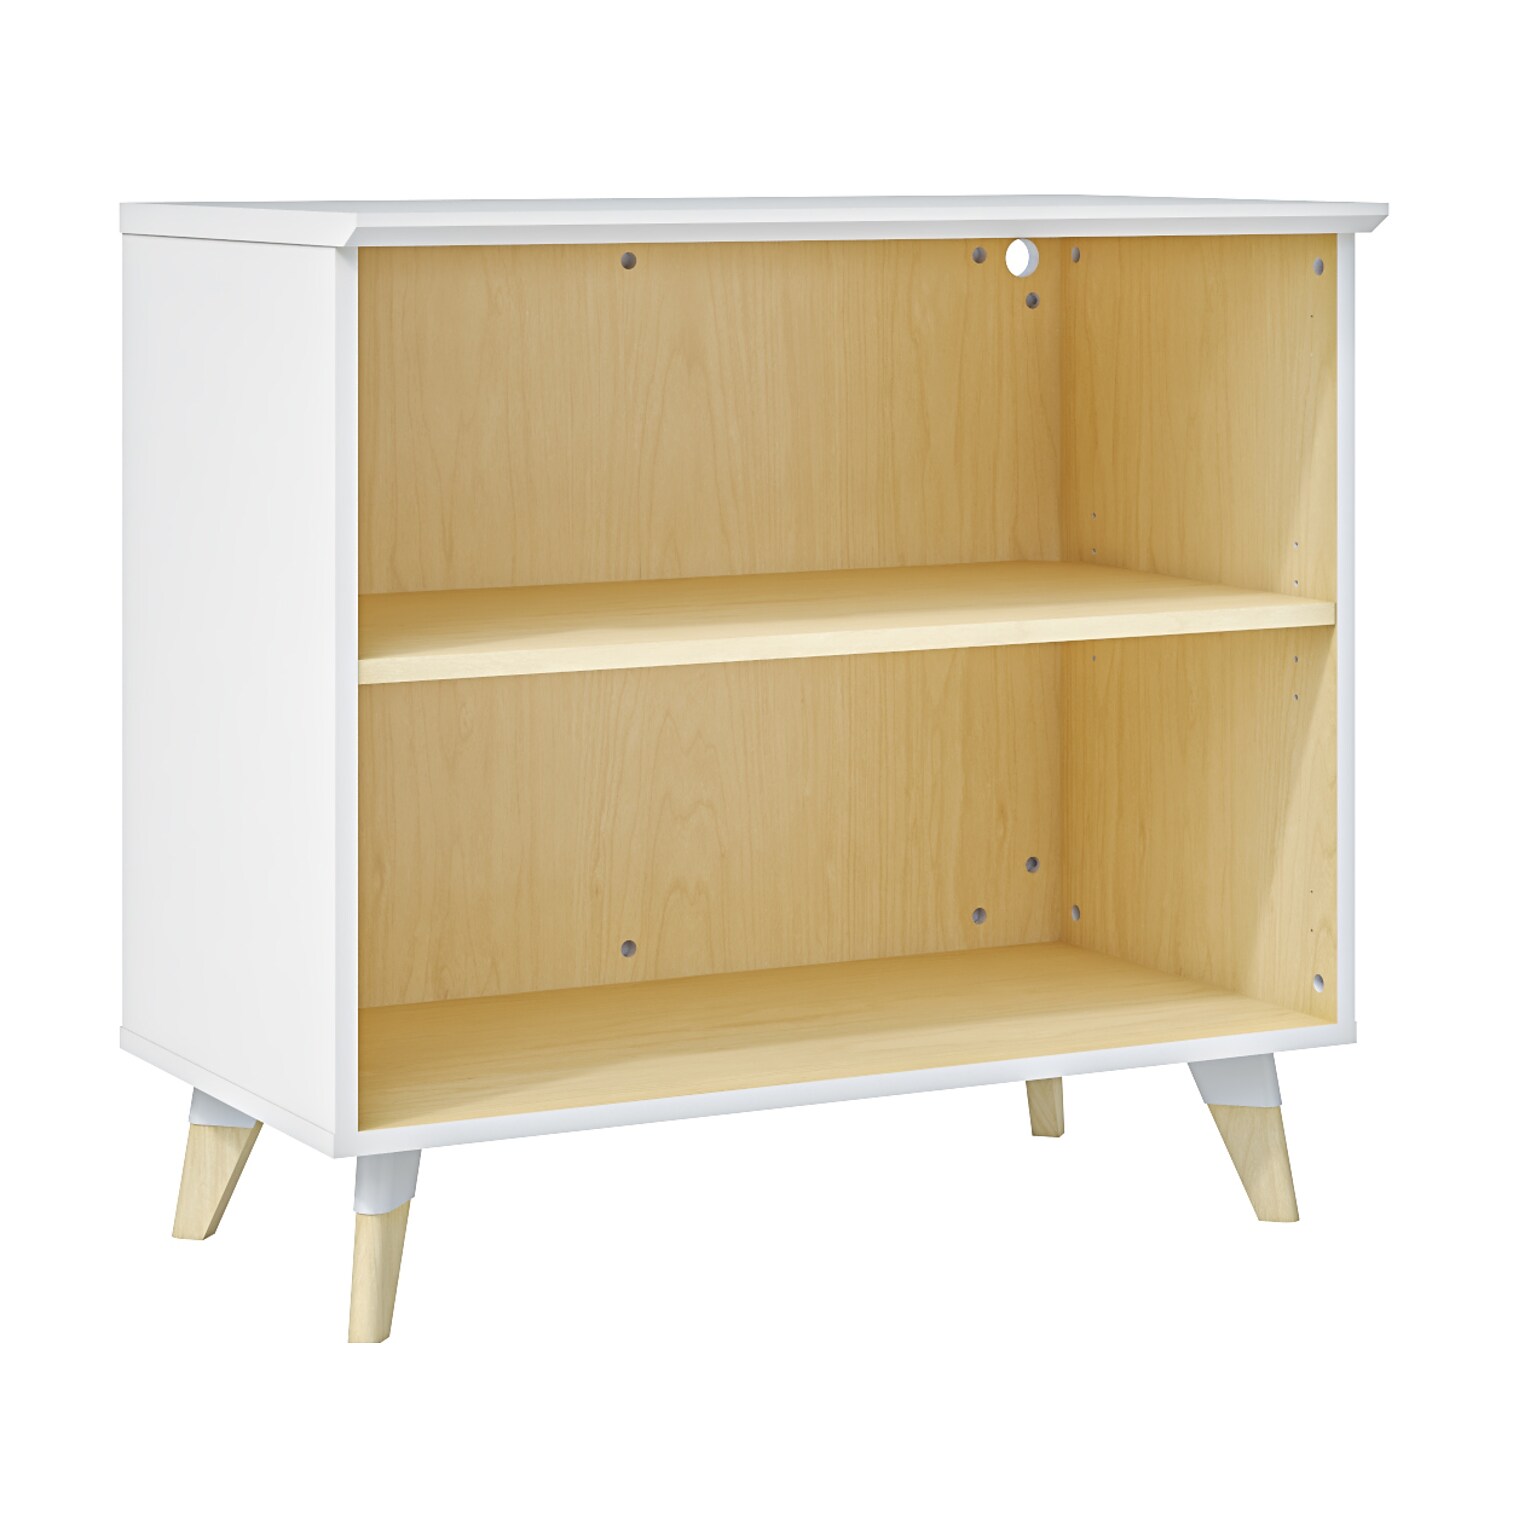 Safco Resi 33.74 Storage Cabinet with Two Shelves, White/Maple (RESCAB36WH)